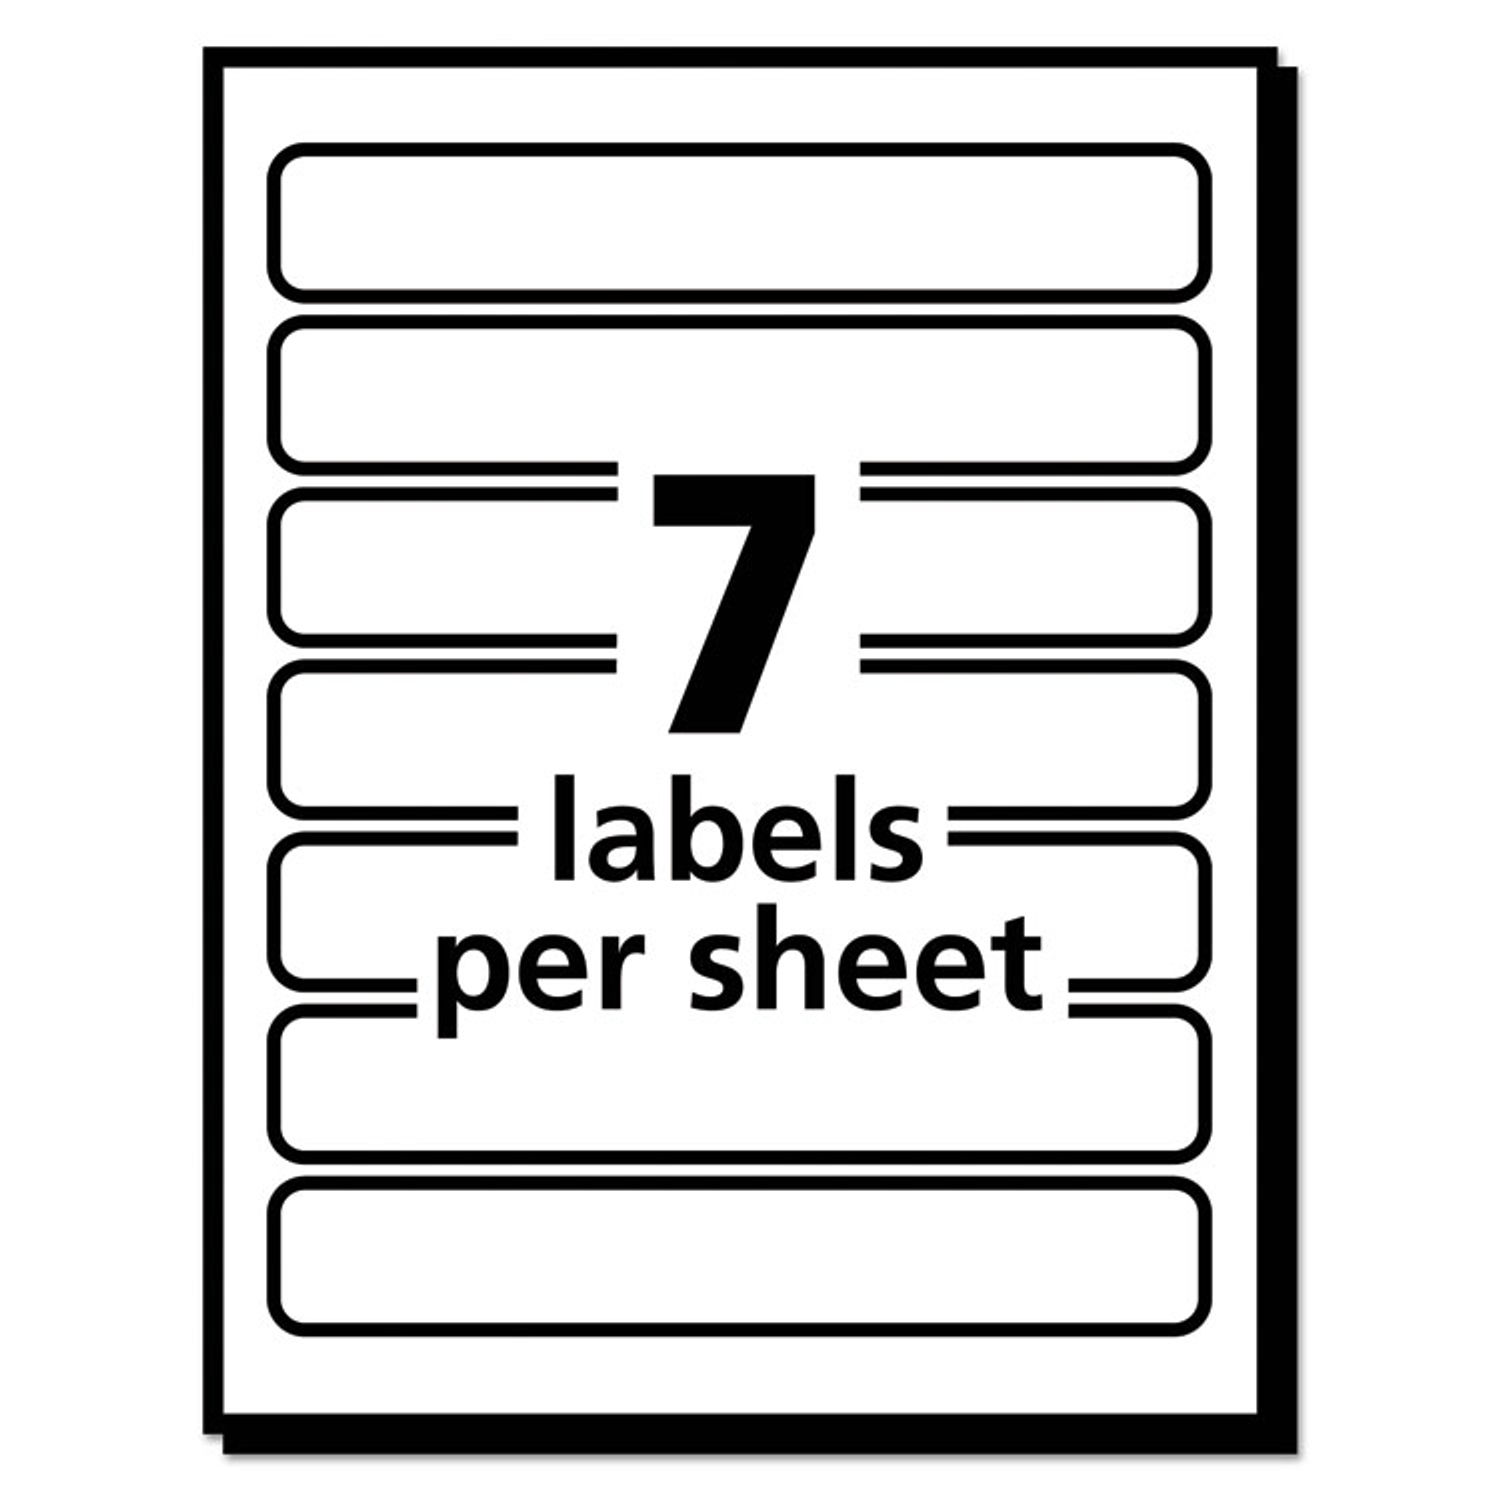 1-3-cut-file-folder-labels-w-surefeed-by-avery-ave5230